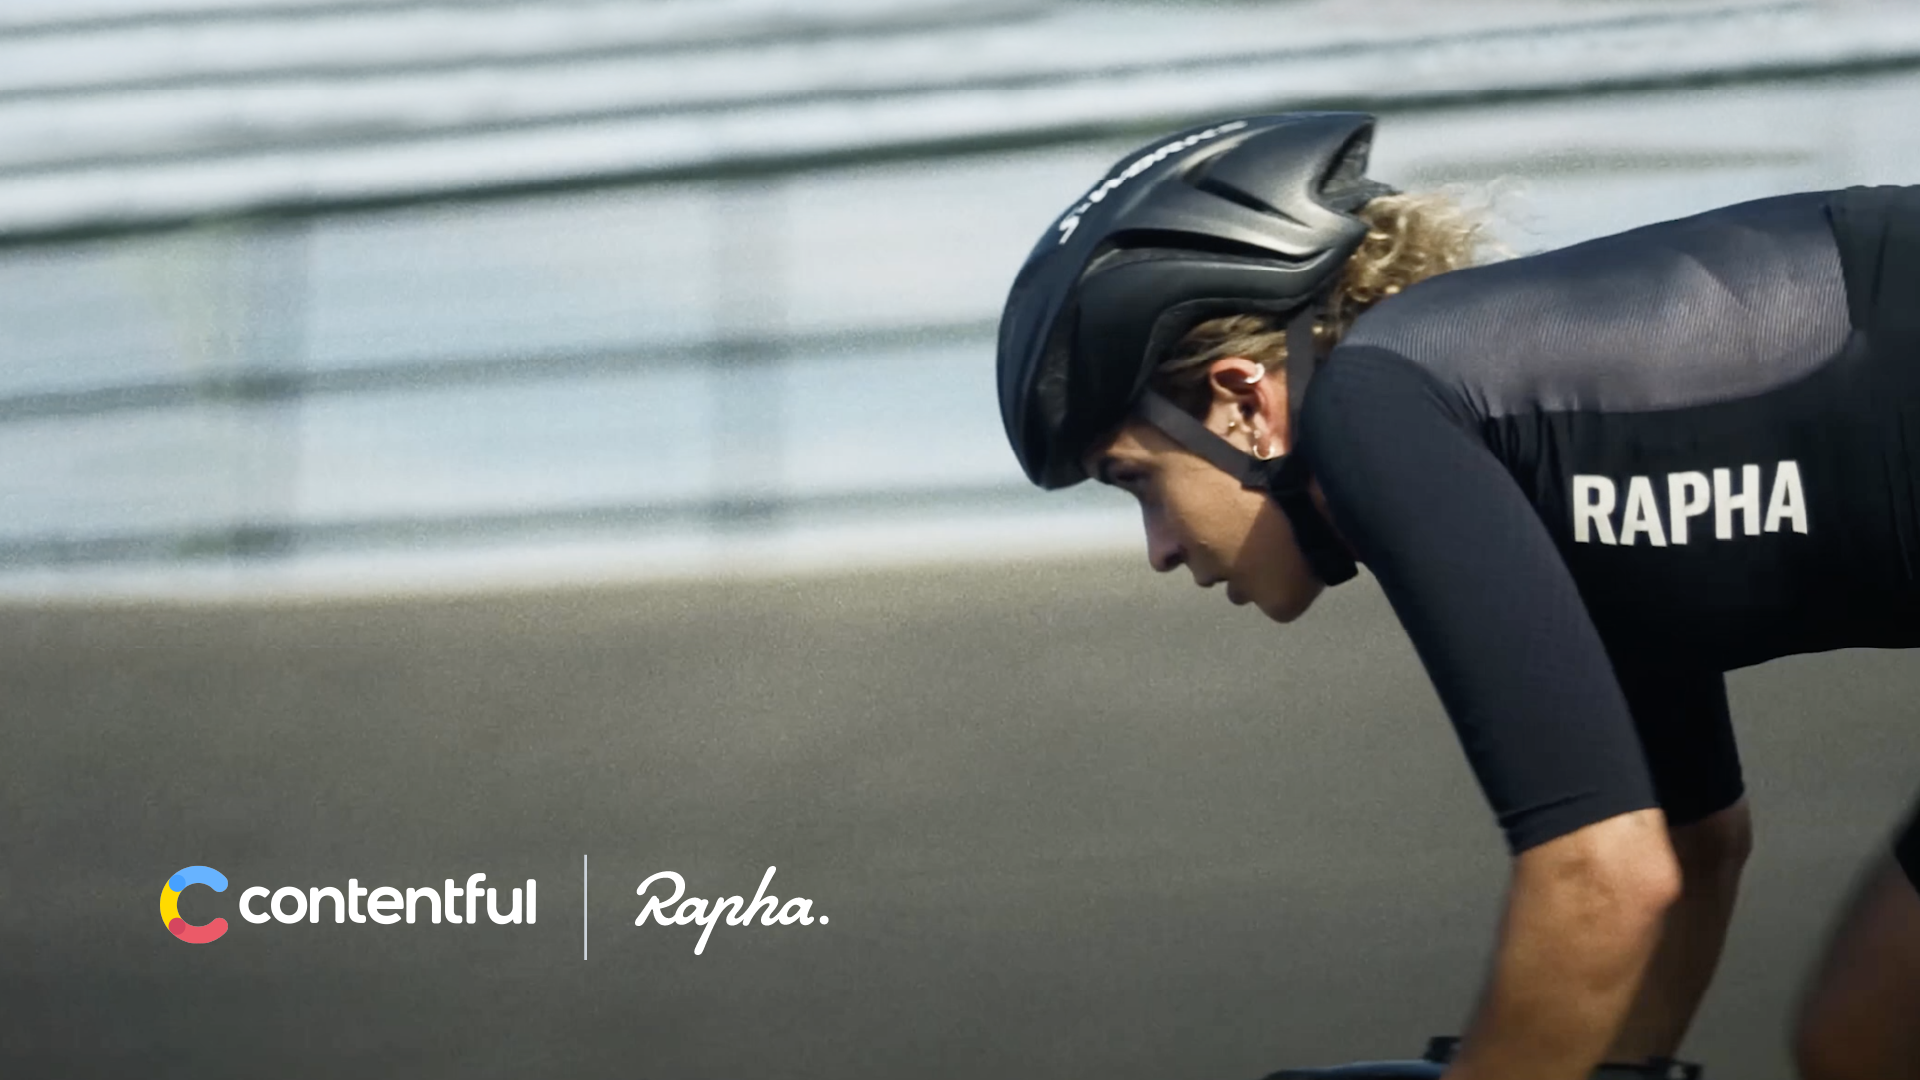 A person rides a bike wearing Rapha-branded clothing